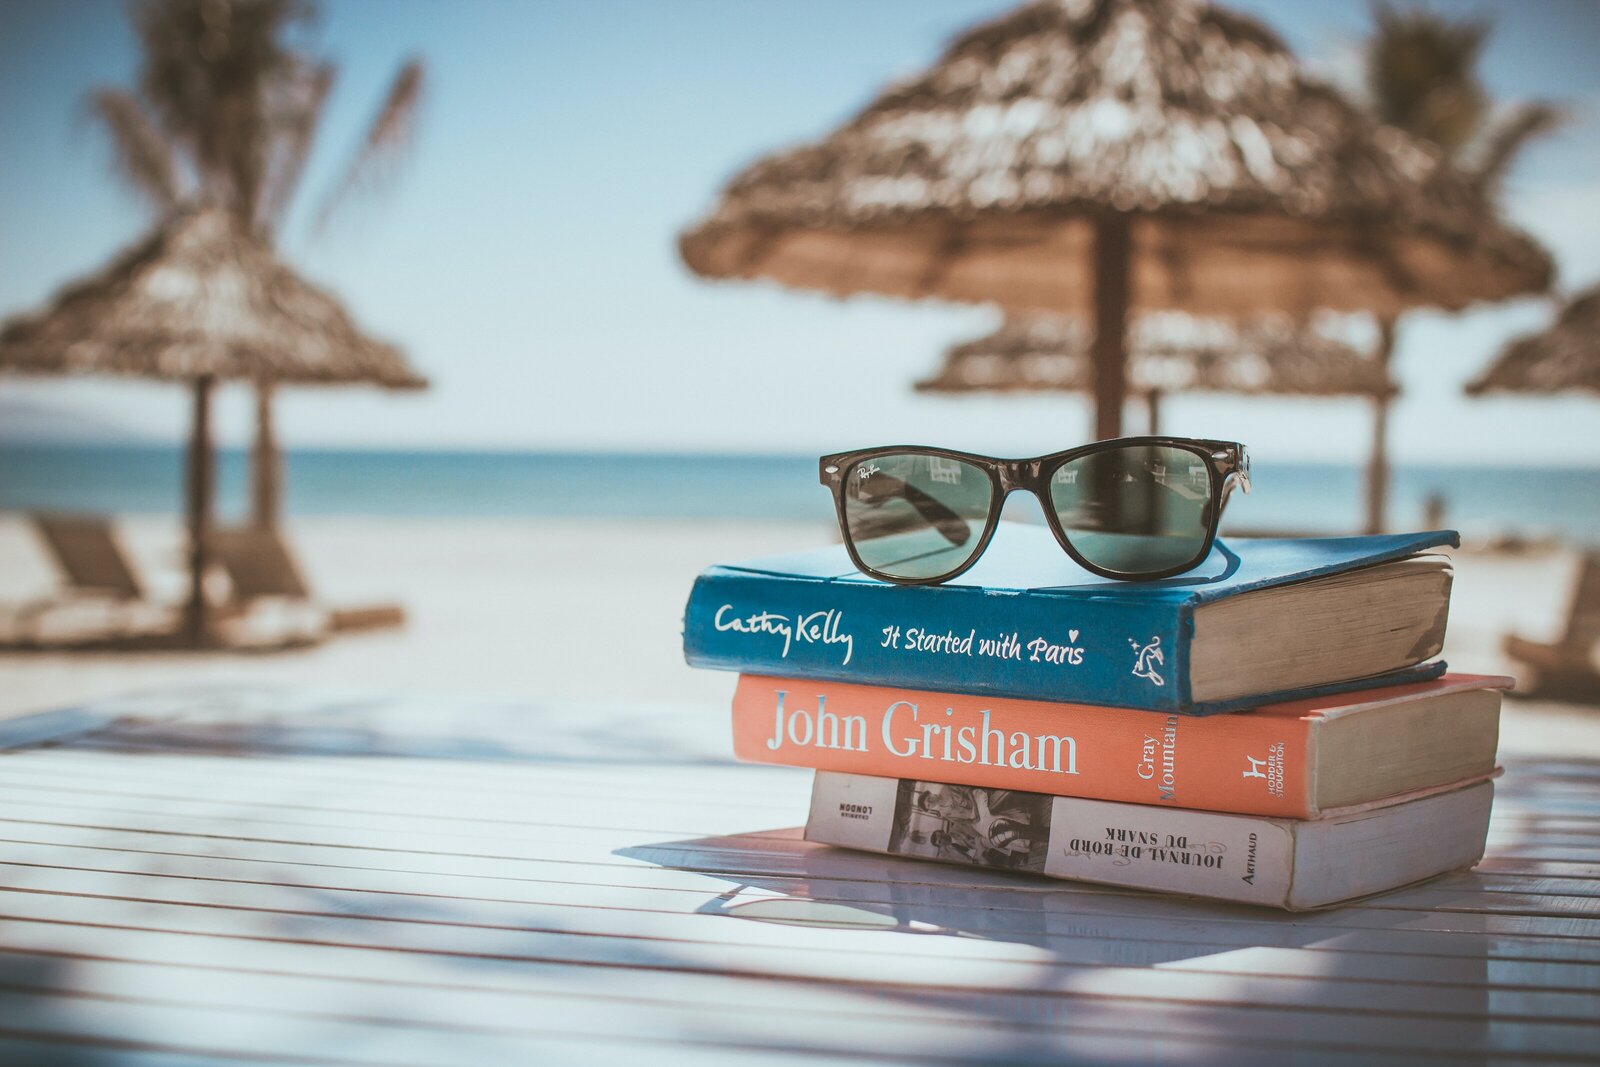 several books stacked on a table overlooking the ocean